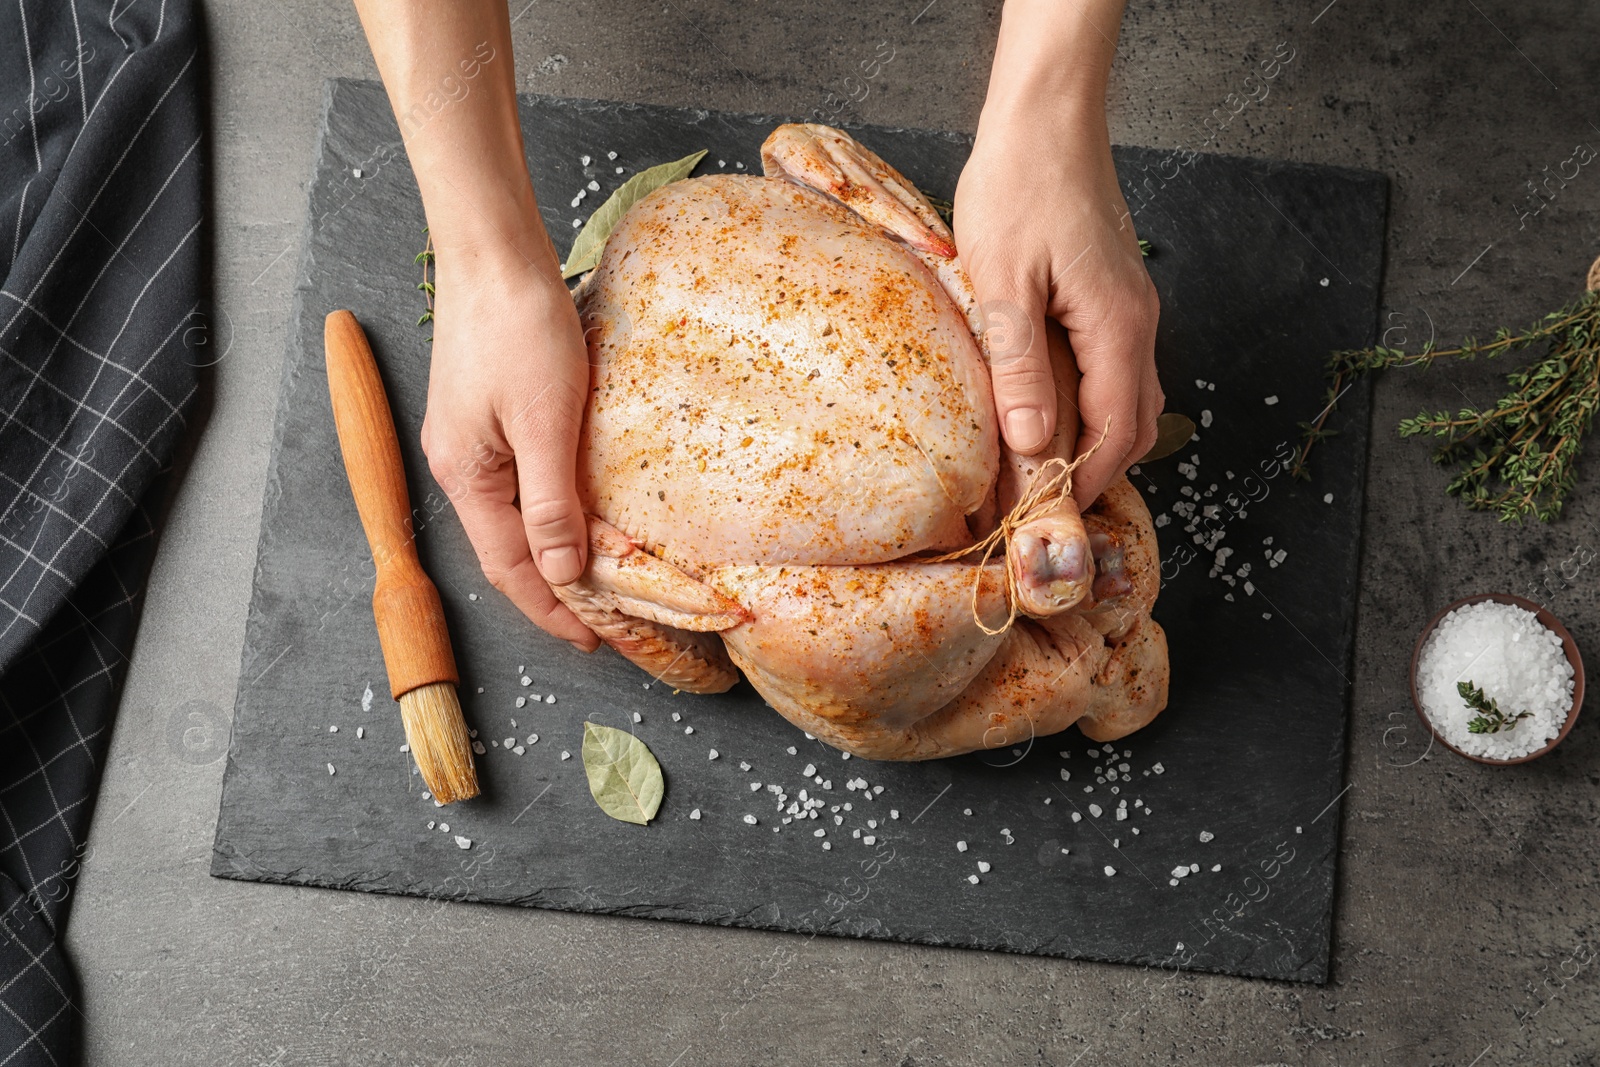 Photo of Woman preparing whole turkey at table, top view